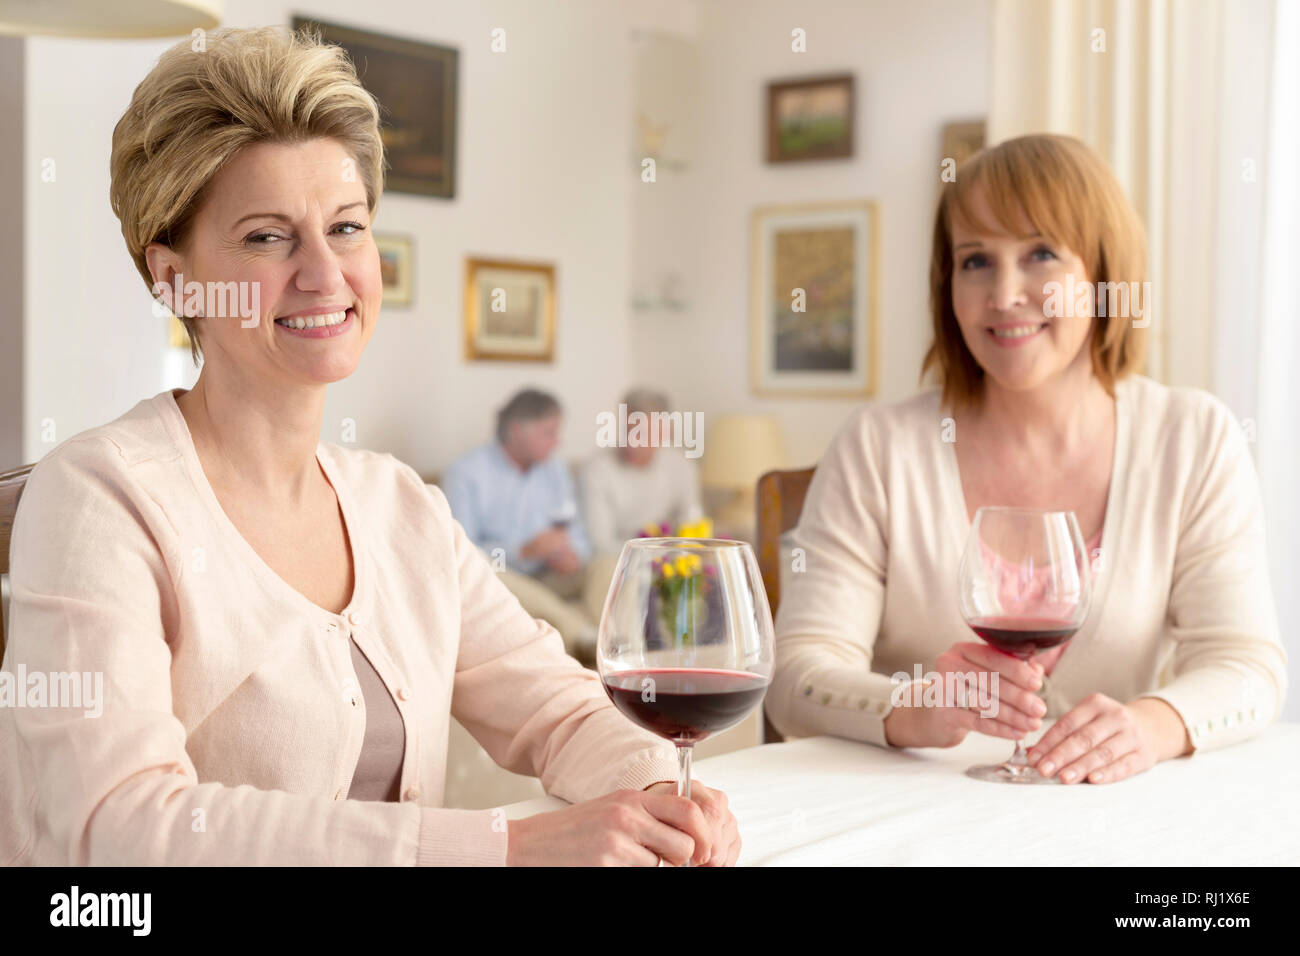 Portrait of smiling mature women sitting with wineglasses at table à manger Banque D'Images